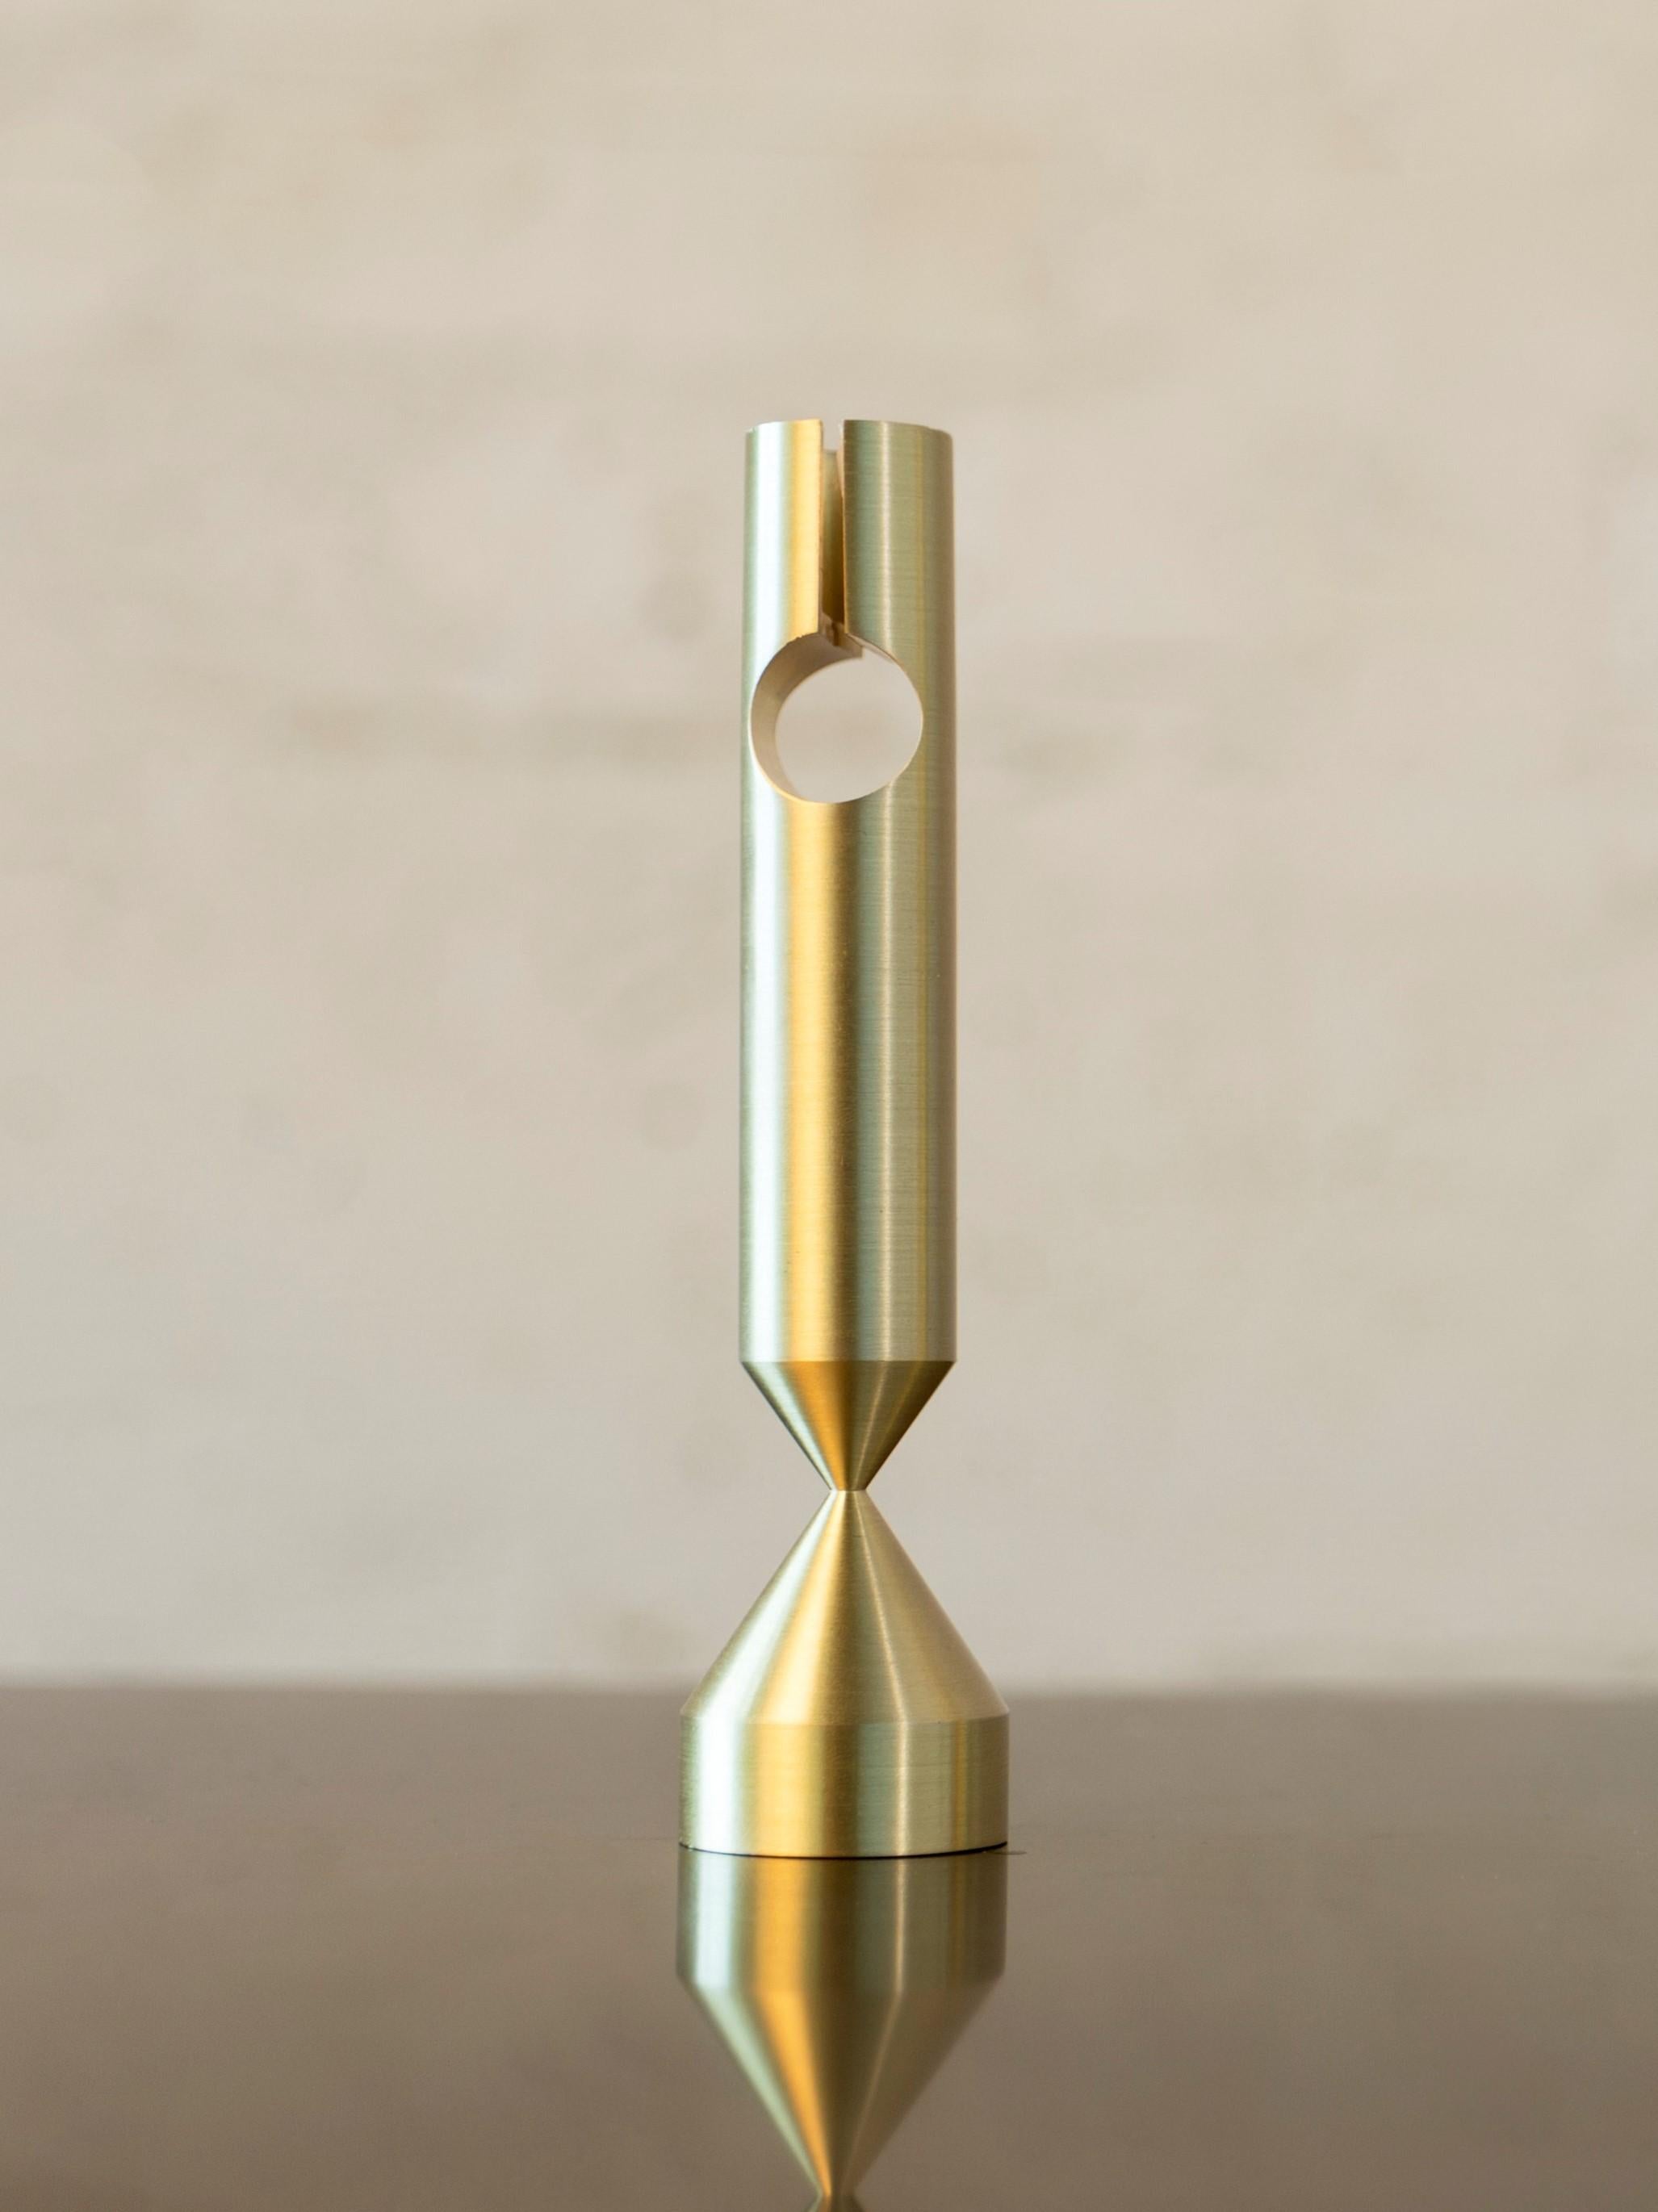 Small Pillar brass candlestick by Gentner Design
Dimensions: D 3.8 x H 13.8 cm
Materials: brush raw brass
Available in brush raw brass and darkened brass.
Available in small, medium and large.

Gentner Design
Rooted in a language of sculpture,